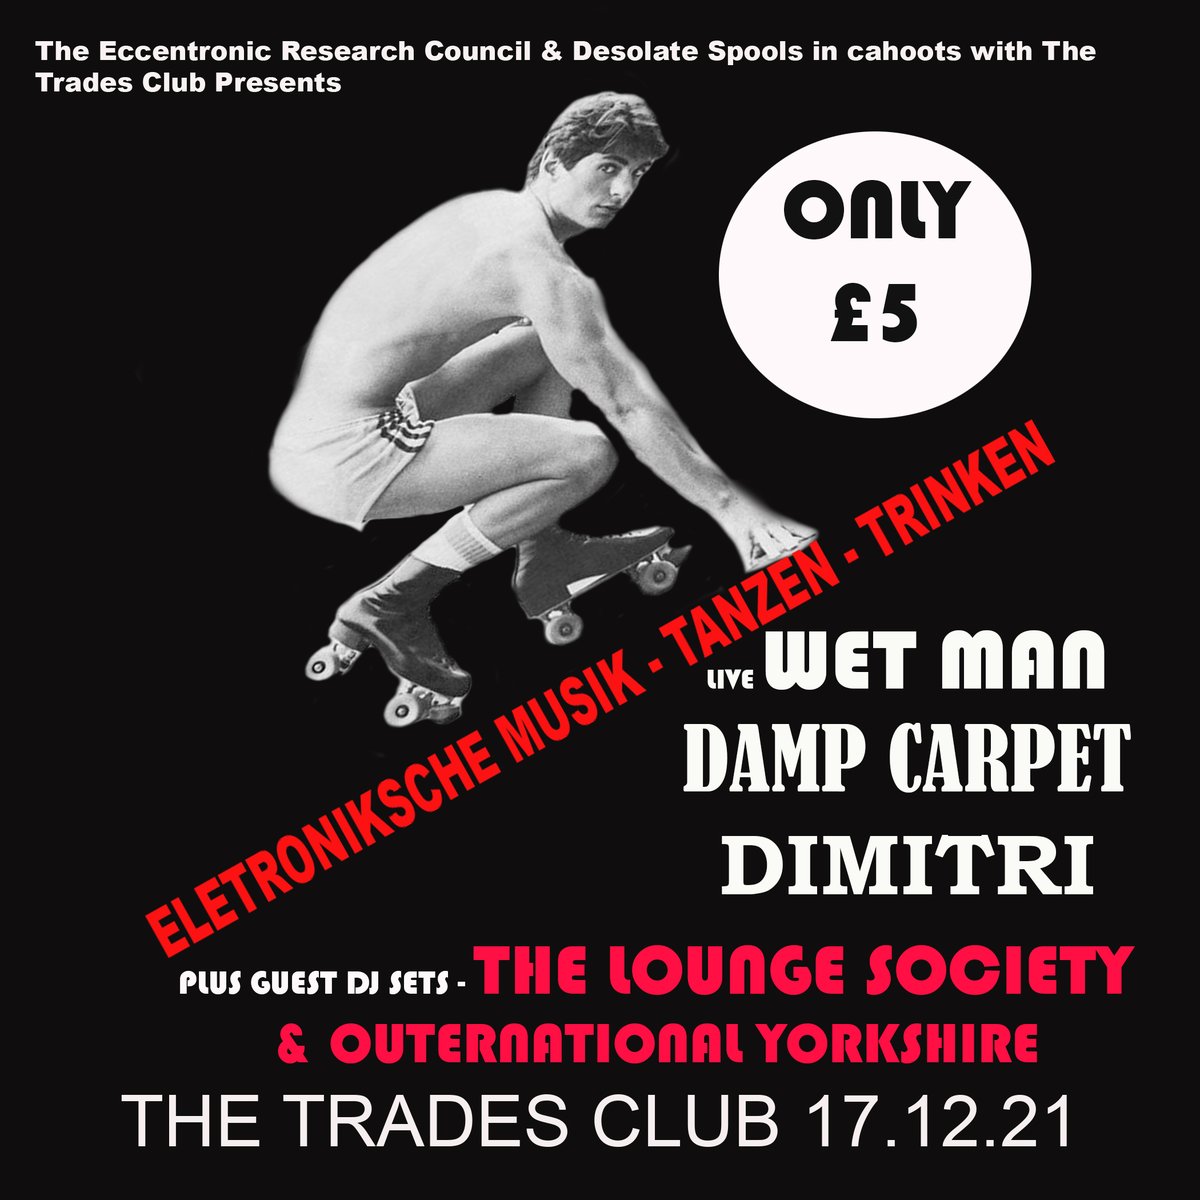 TONIGHT: Backed by members of @themoonlandingz & @teachersofpop as part of @The_E_R_C’s Desolate Spools showcase party.. WET MAN, the legendary South Yorkshire Mick Hucknall, DIMITRI - Special guests DJS @LoungeSocietyHB Things are going to get extremely wonky. Come!! Only £5 in.